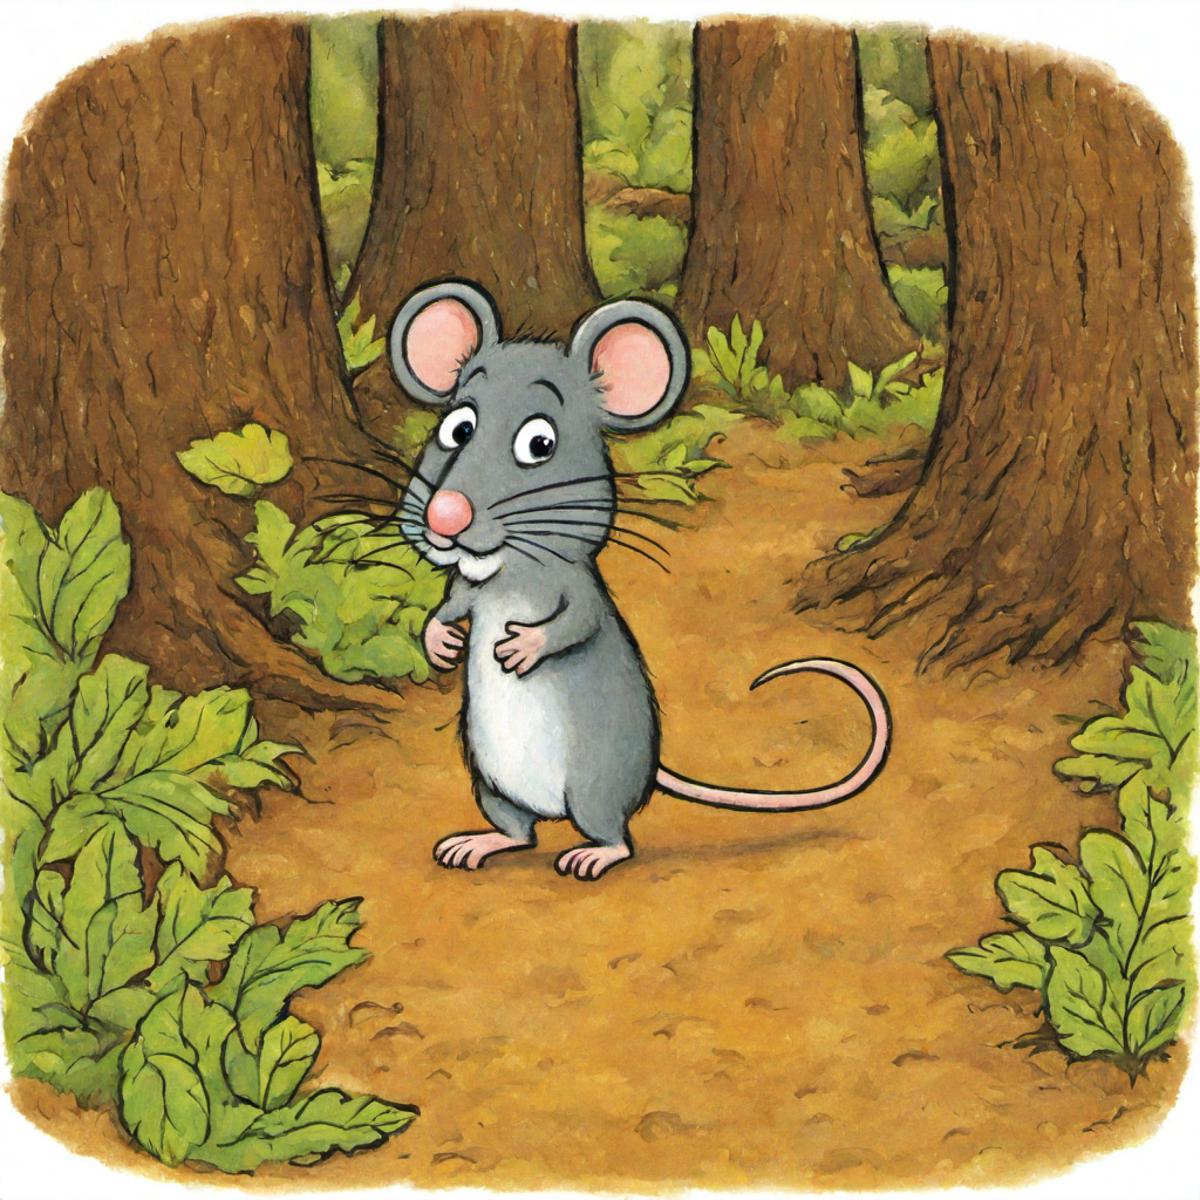 A cartoon mouse standing on a dirt path in the woods.